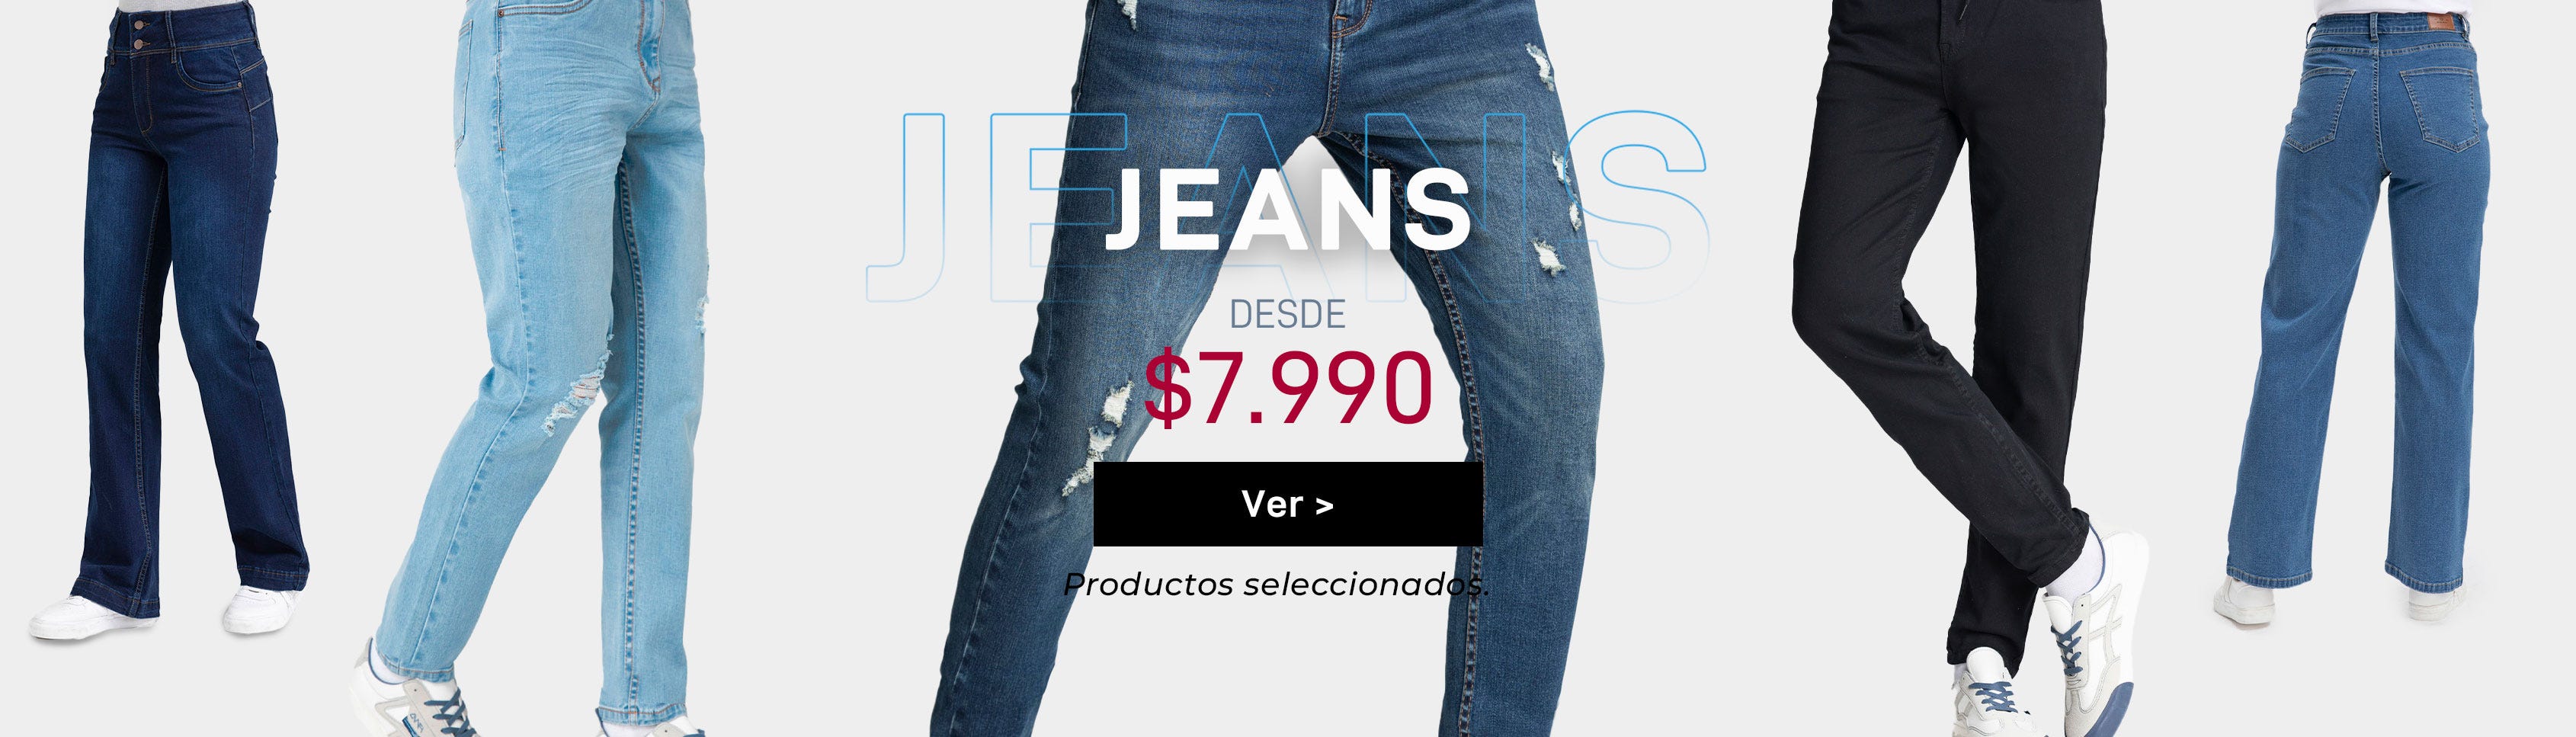 Jeans desde $7.990